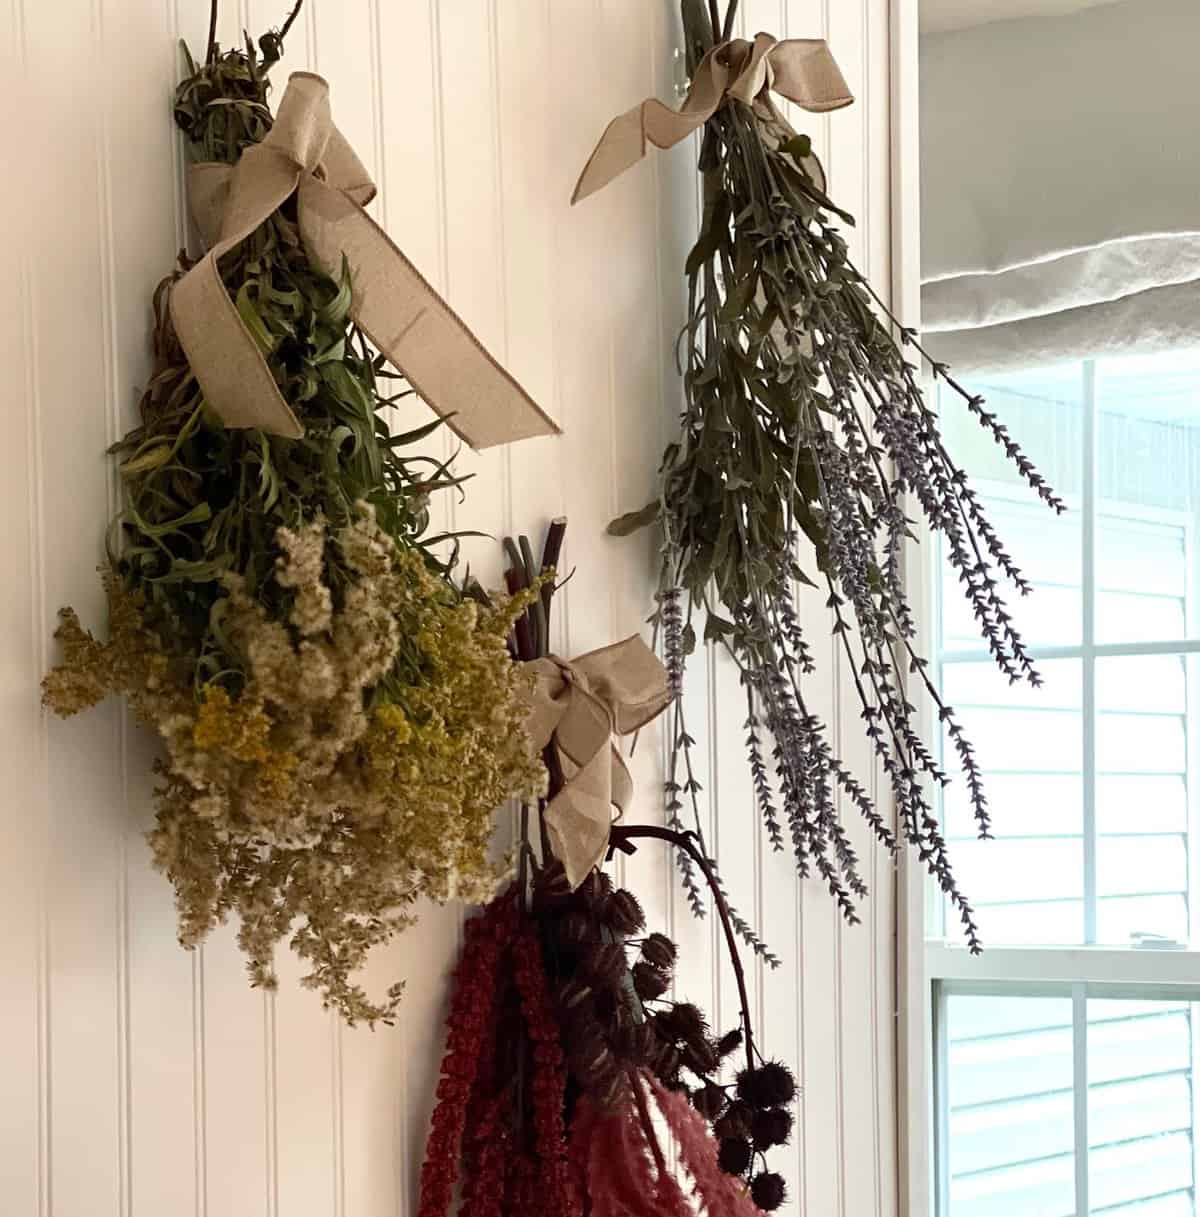 Hanging Dried Flowers As Home Decor